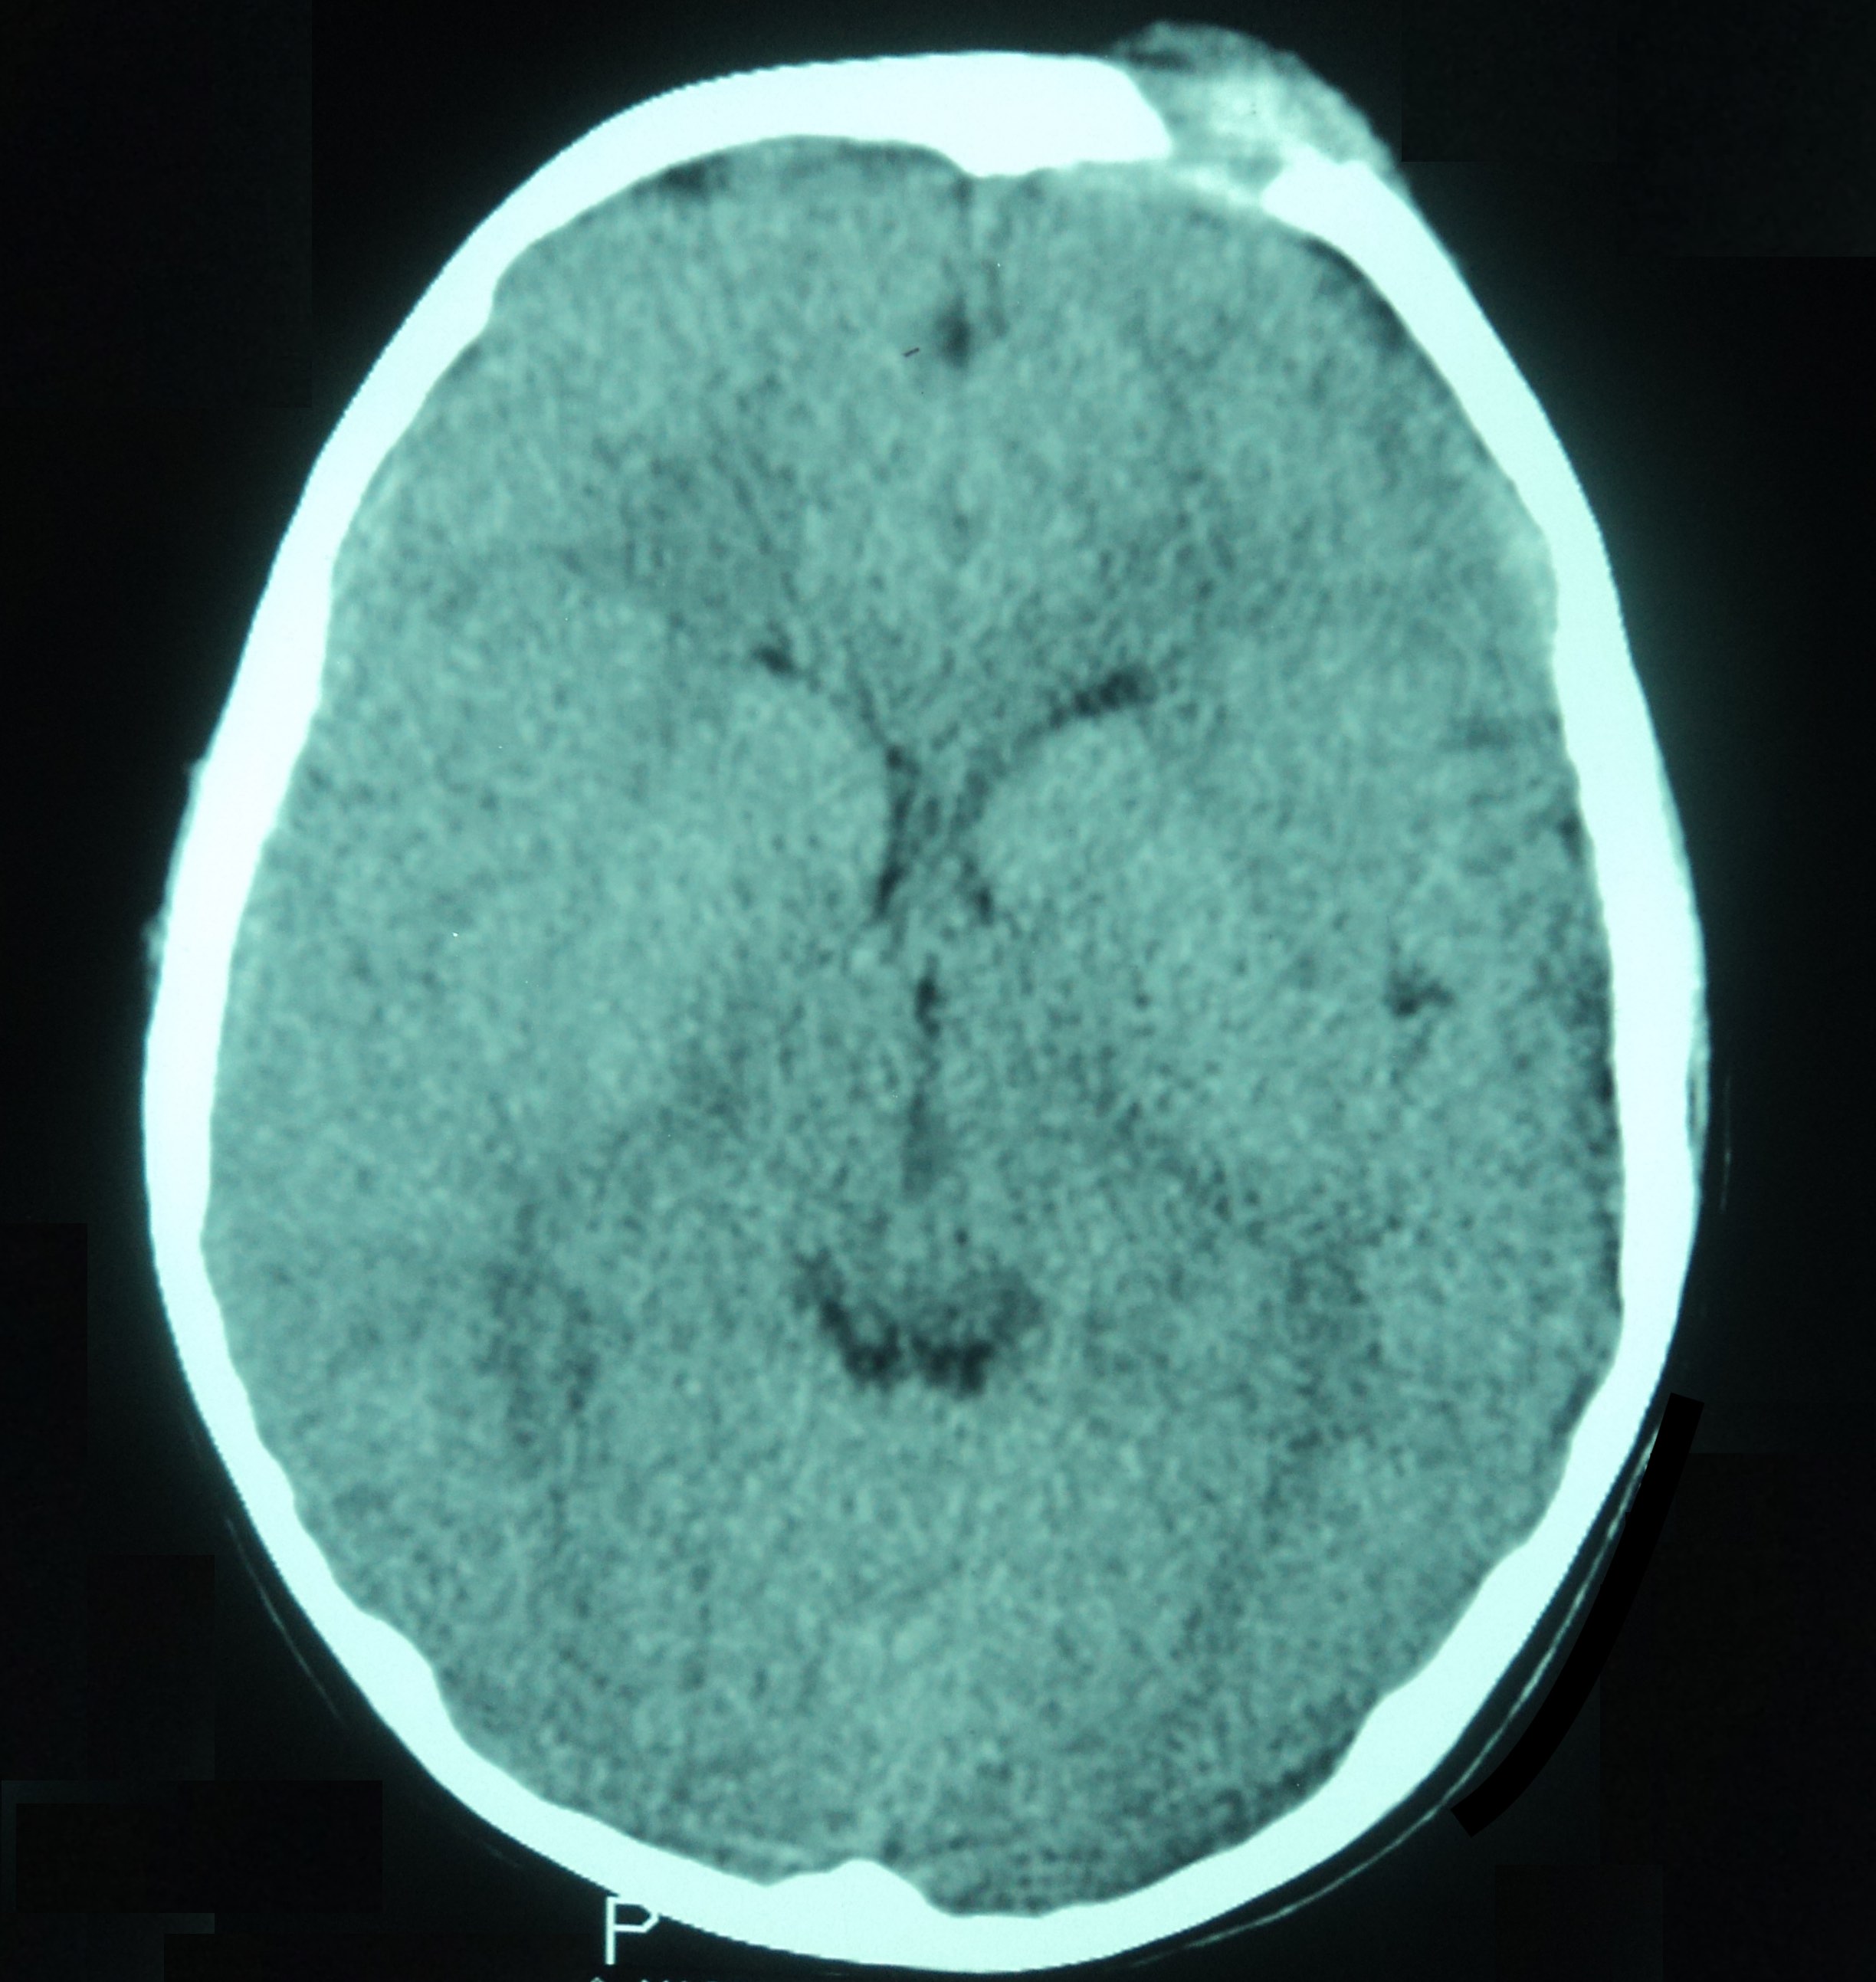 CT of brain without contrast